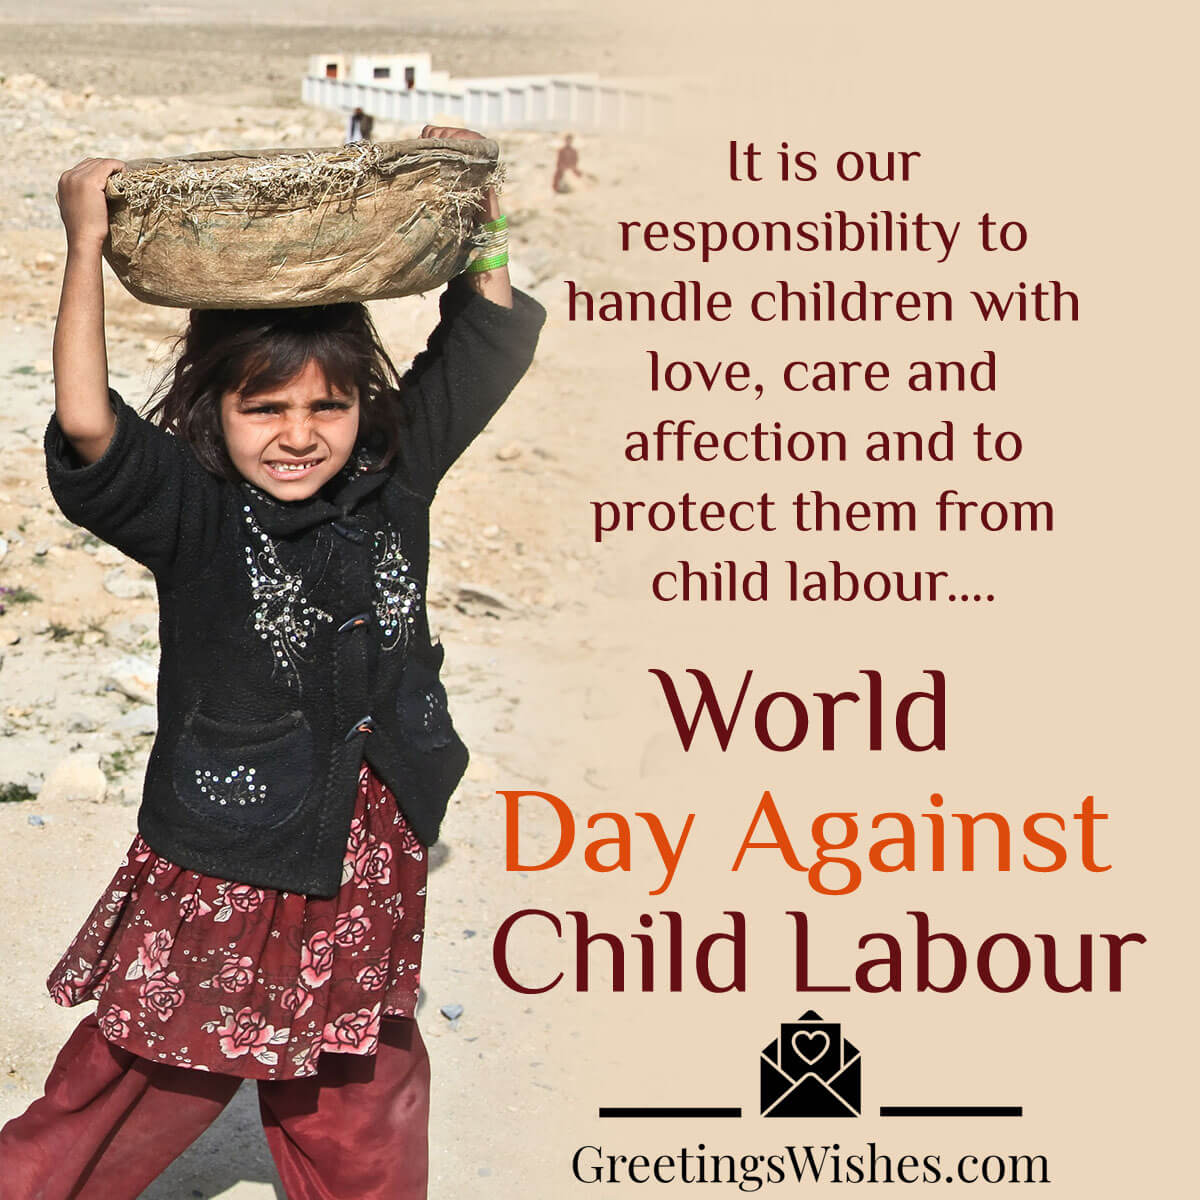 World Day Against Child Labour Wishes (12 June)